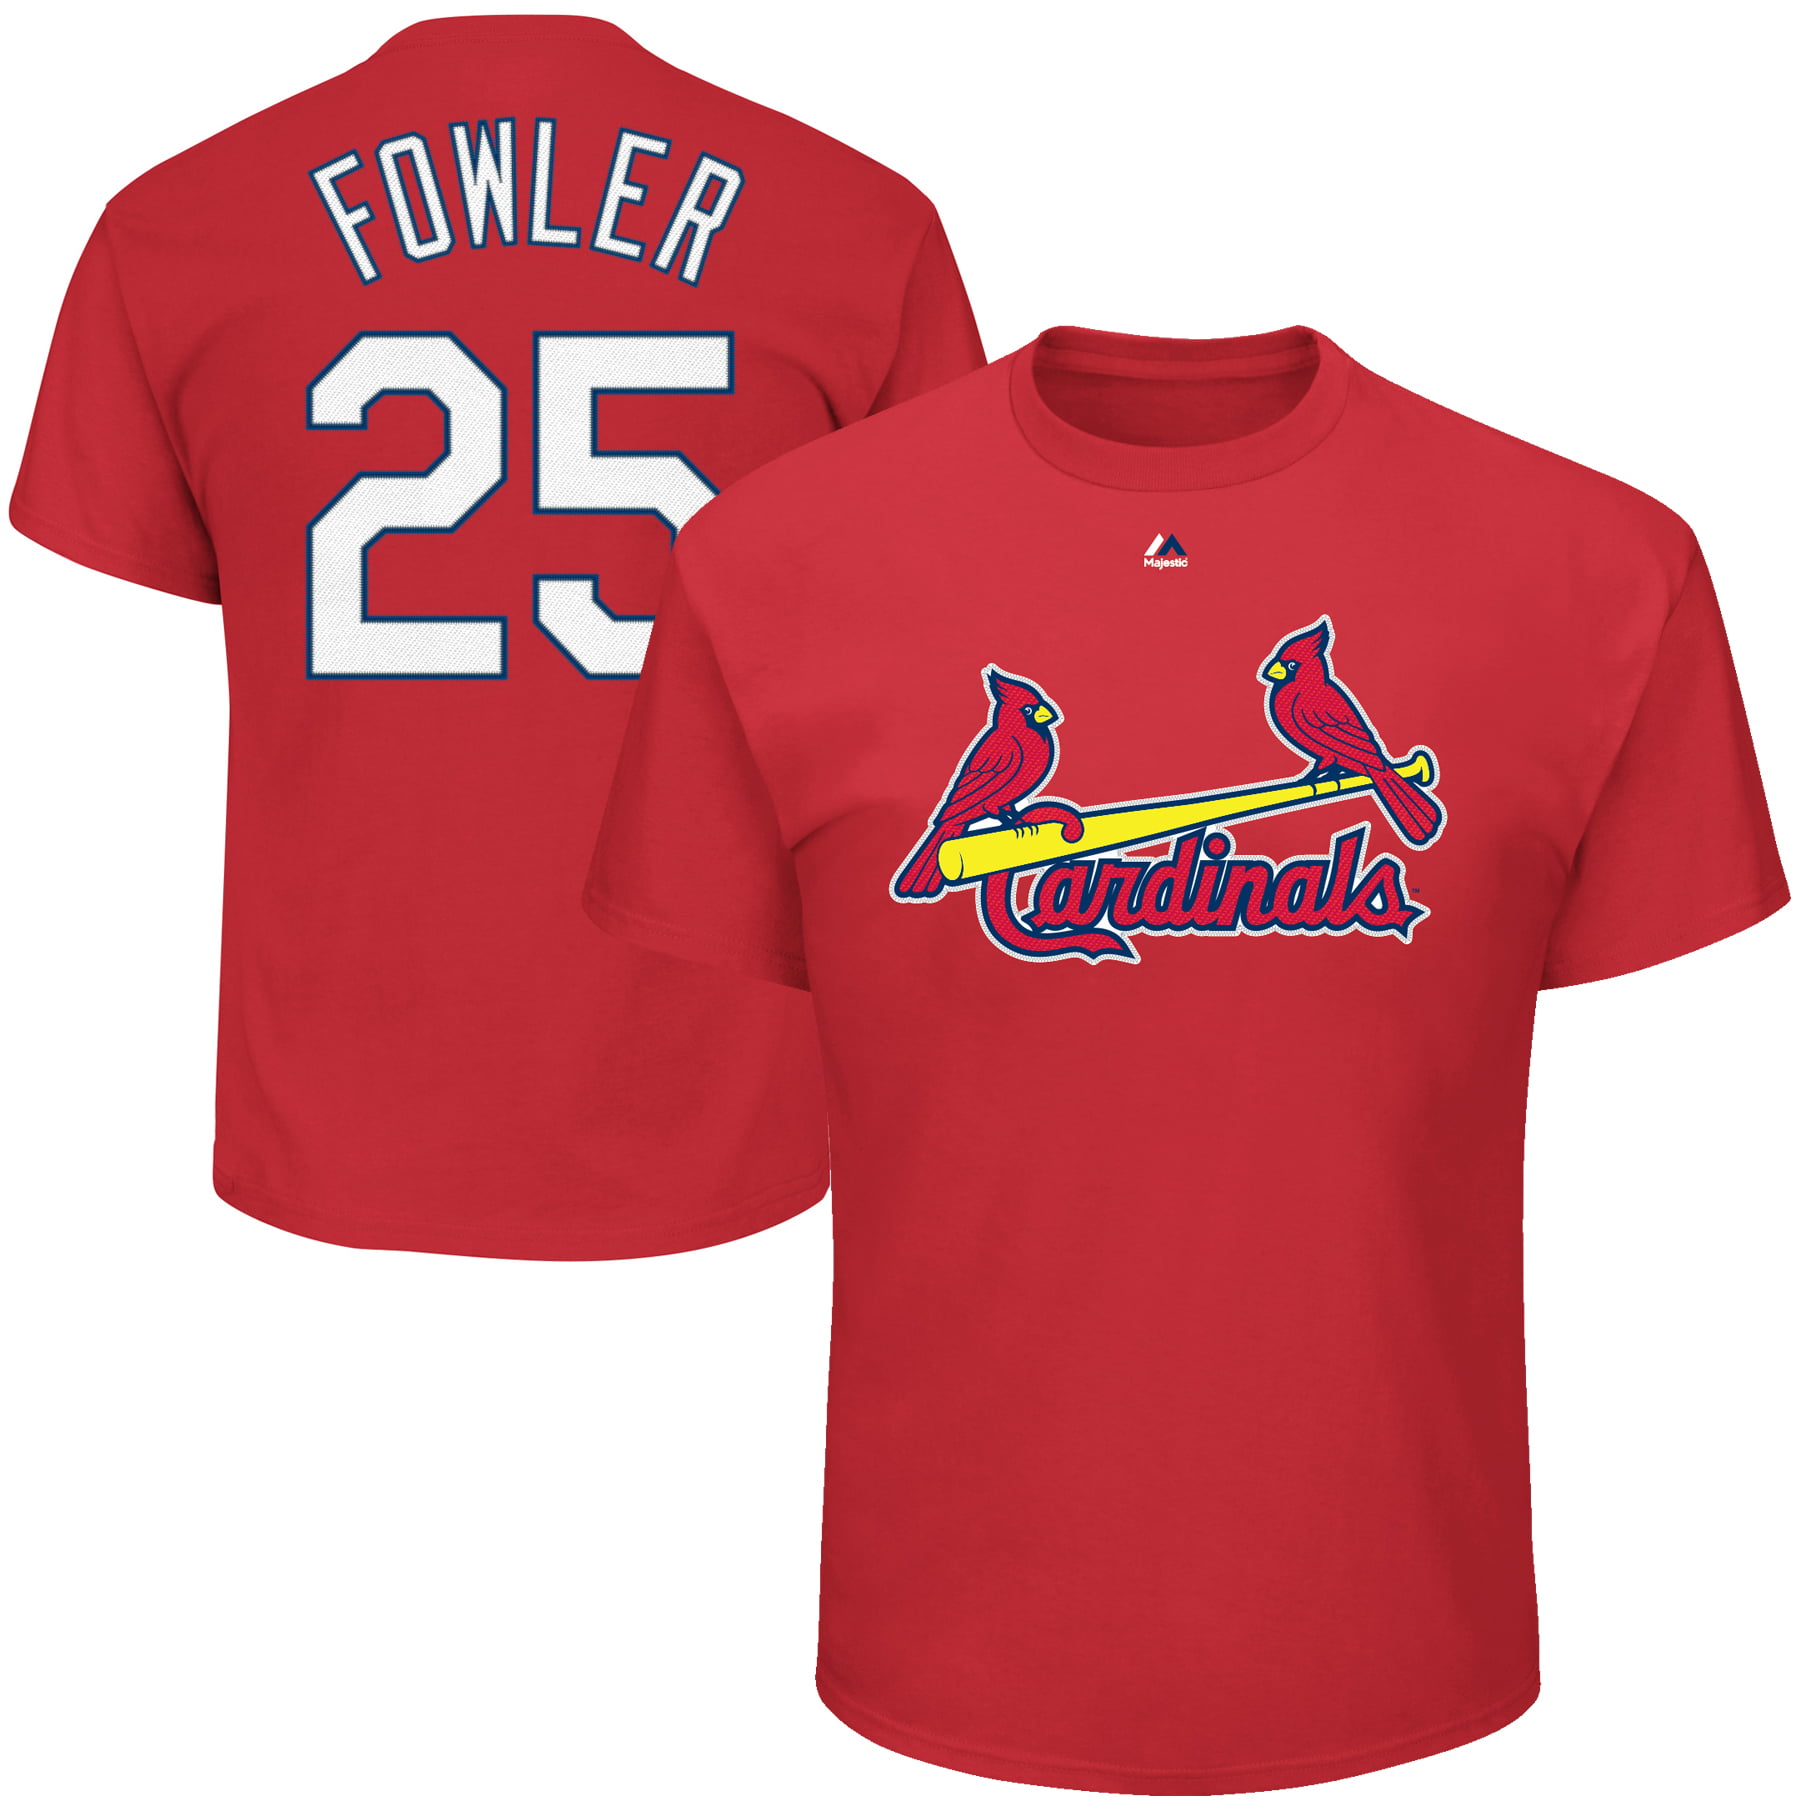 Dexter Fowler St. Louis Cardinals Majestic Name & Number T-Shirt - Red - www.paulmartinsmith.com